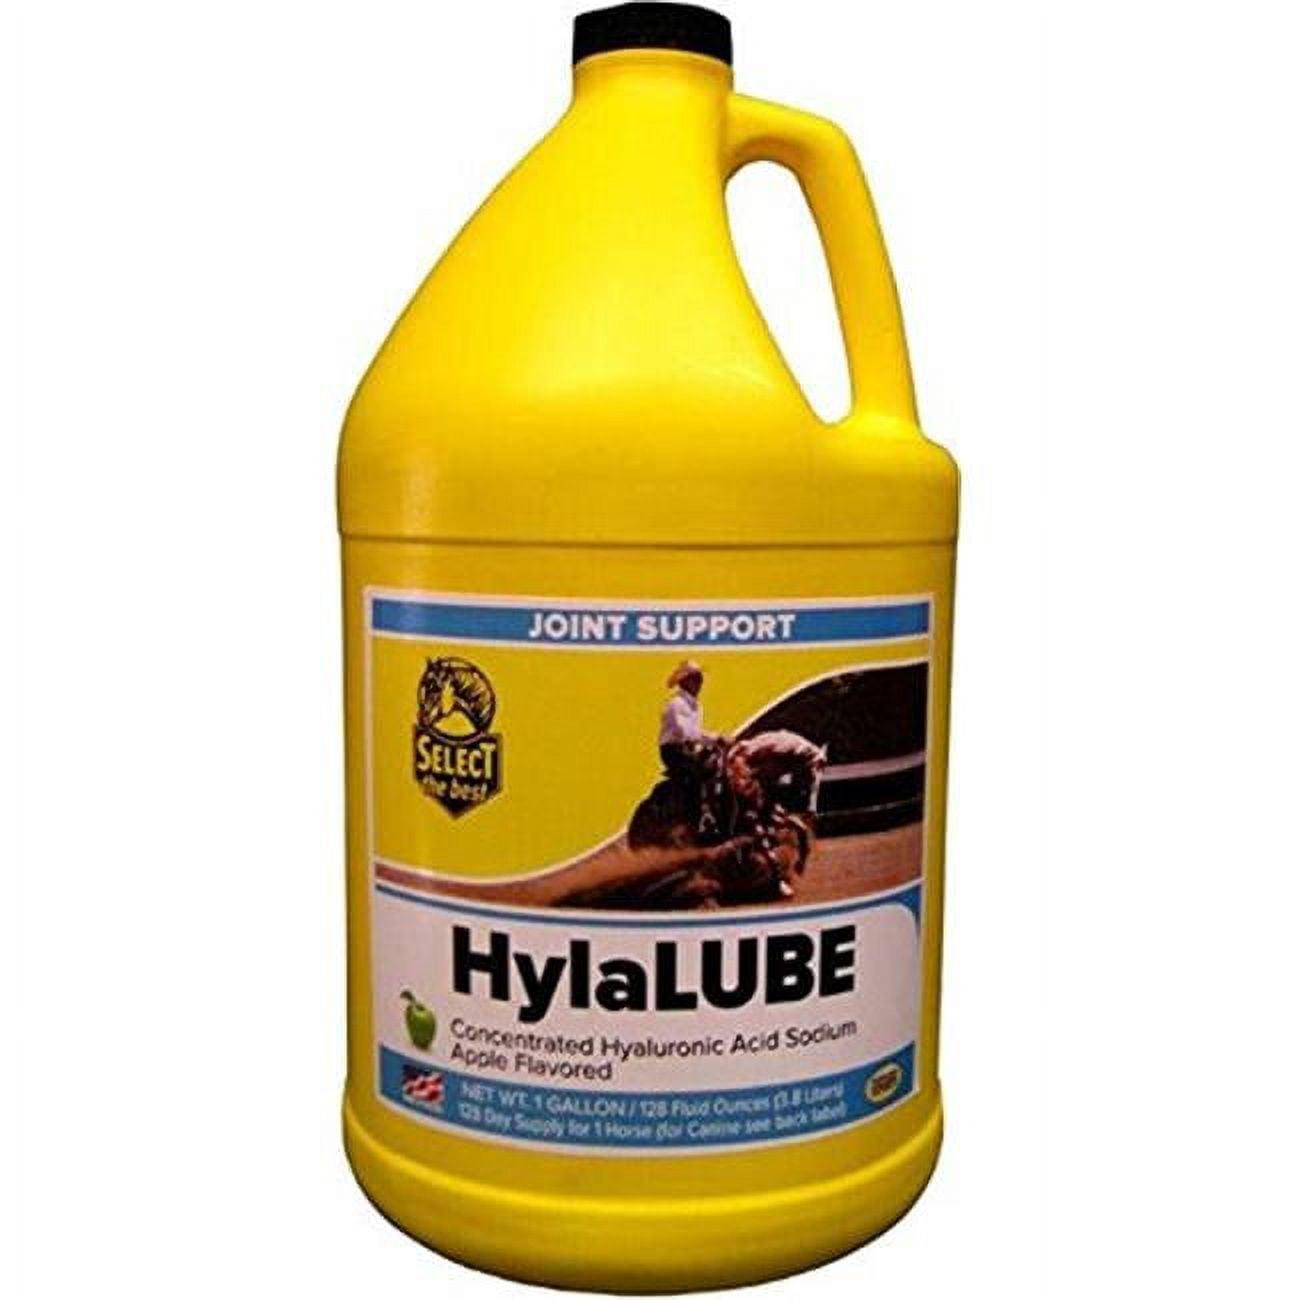 974814 32 Oz Hylalube Concentrate - Apple